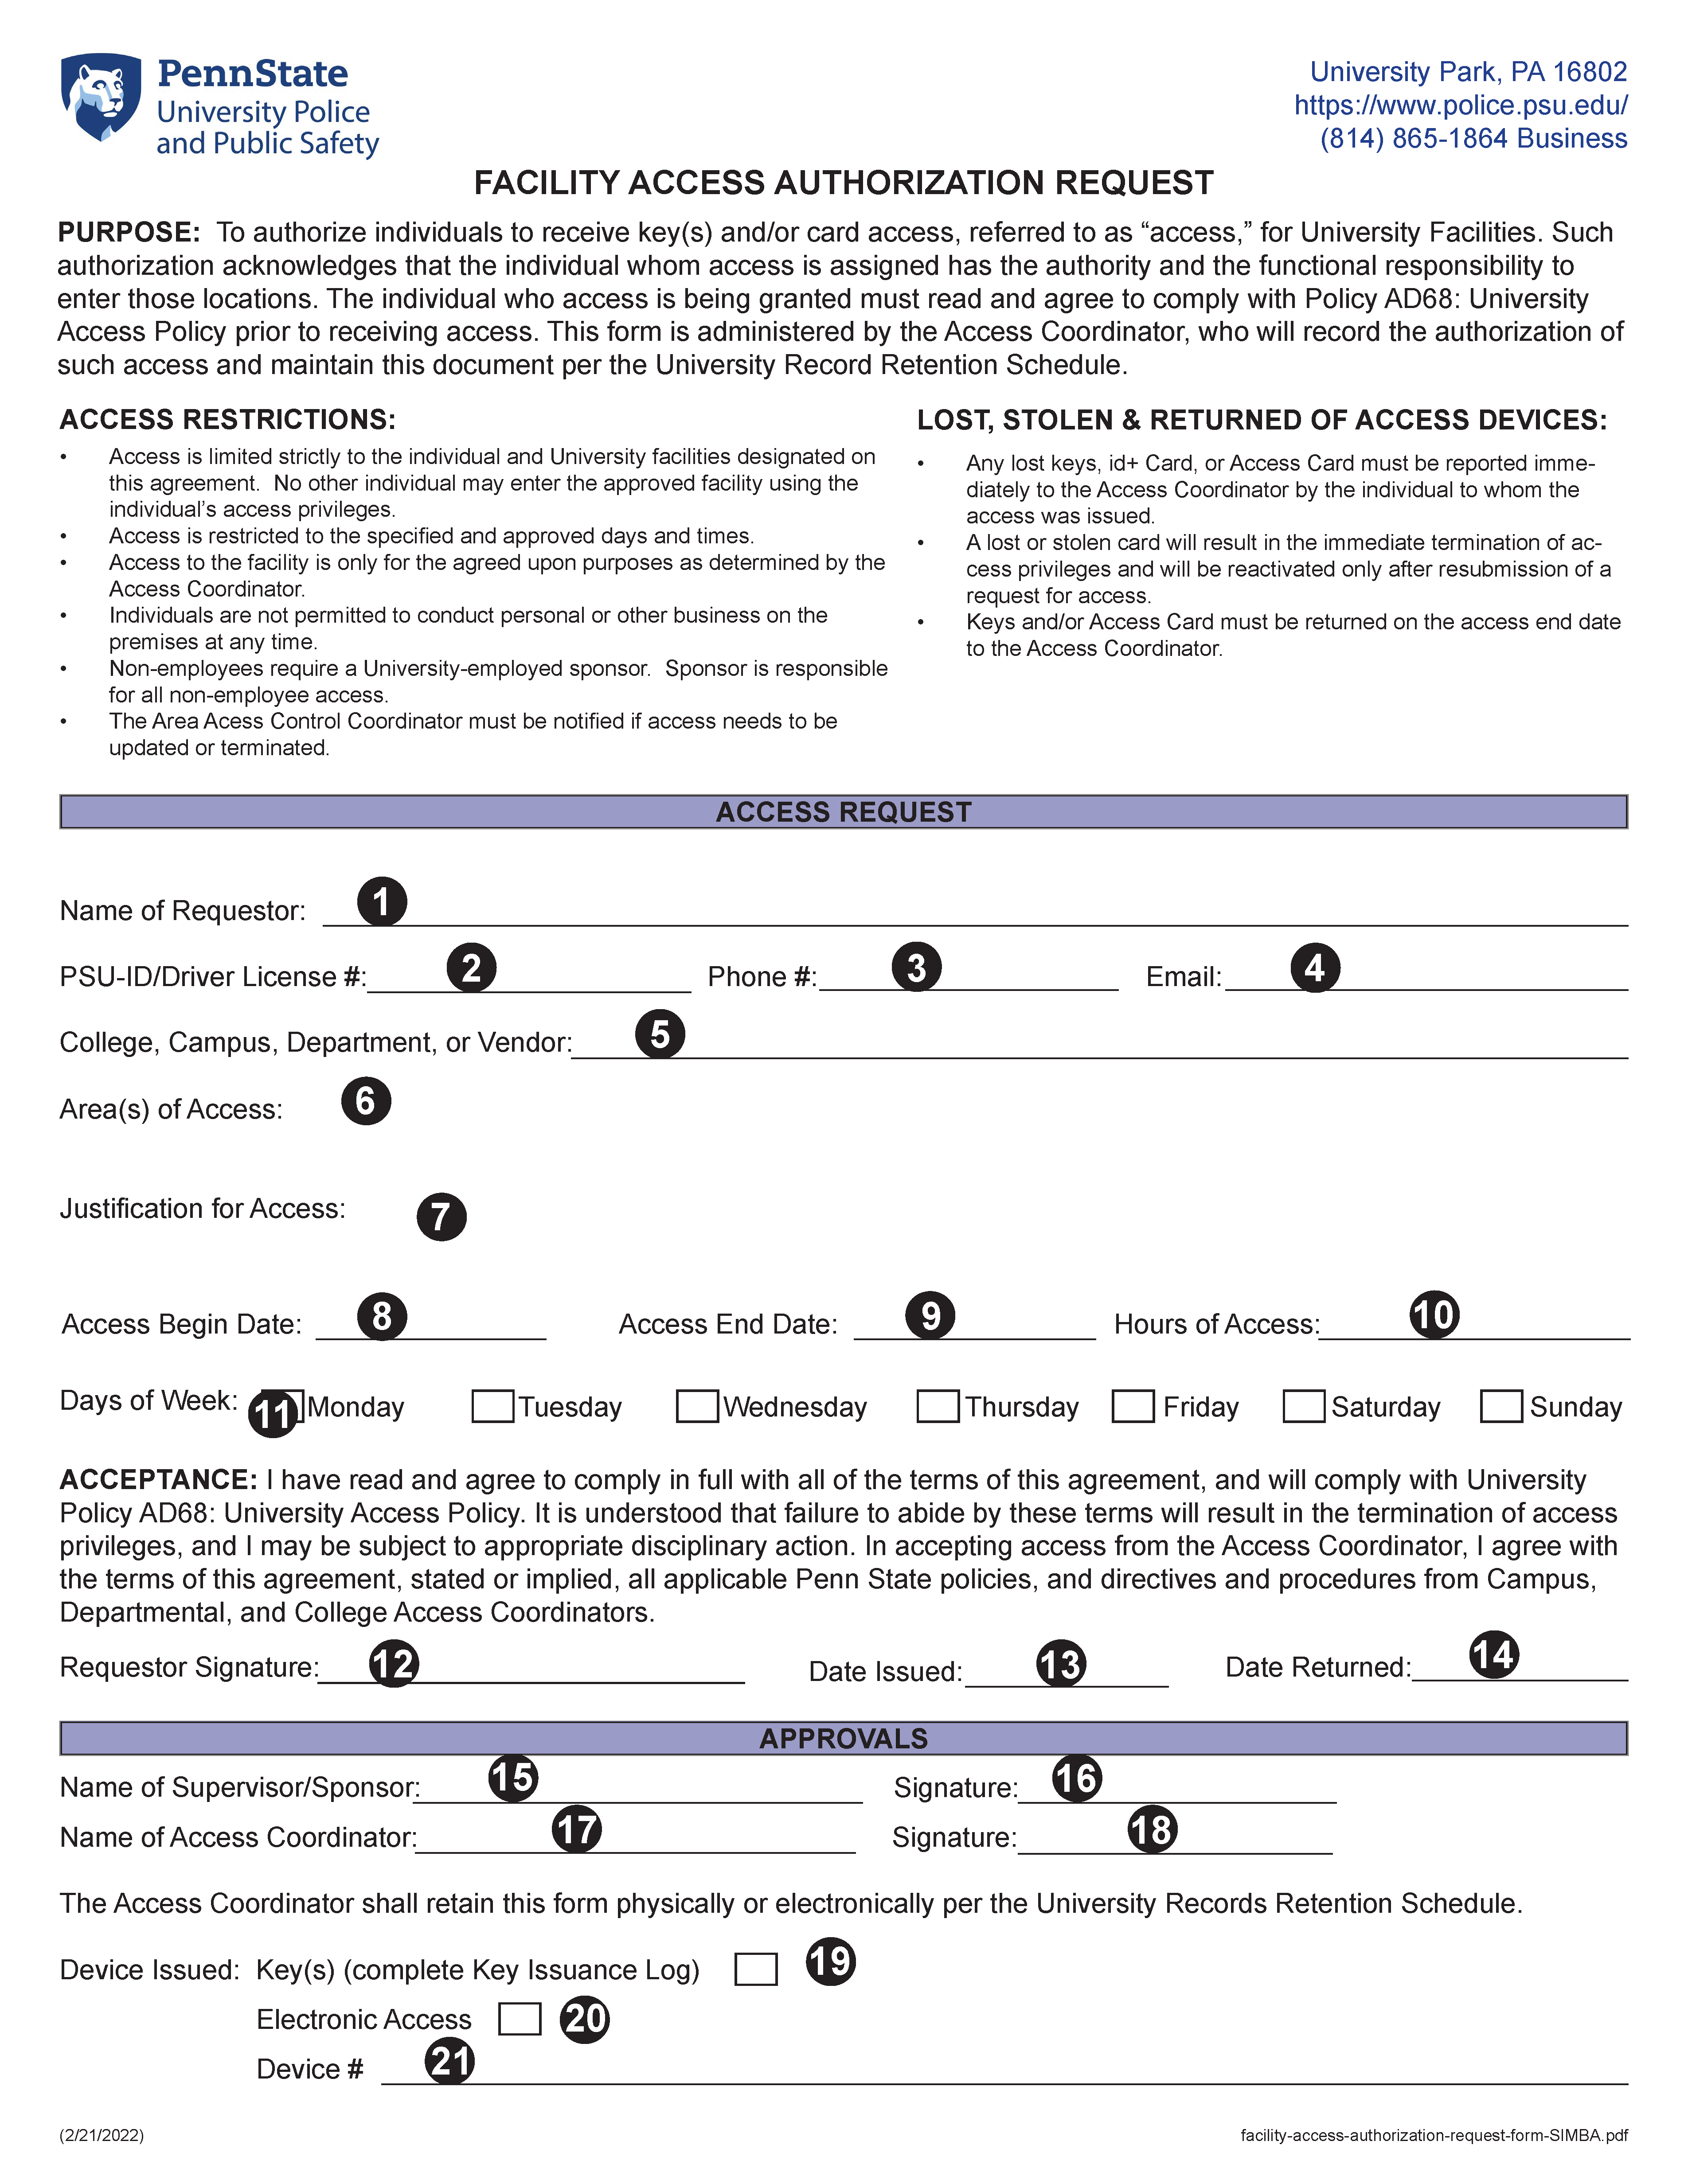 Image of Facility Access Authorization Request Form